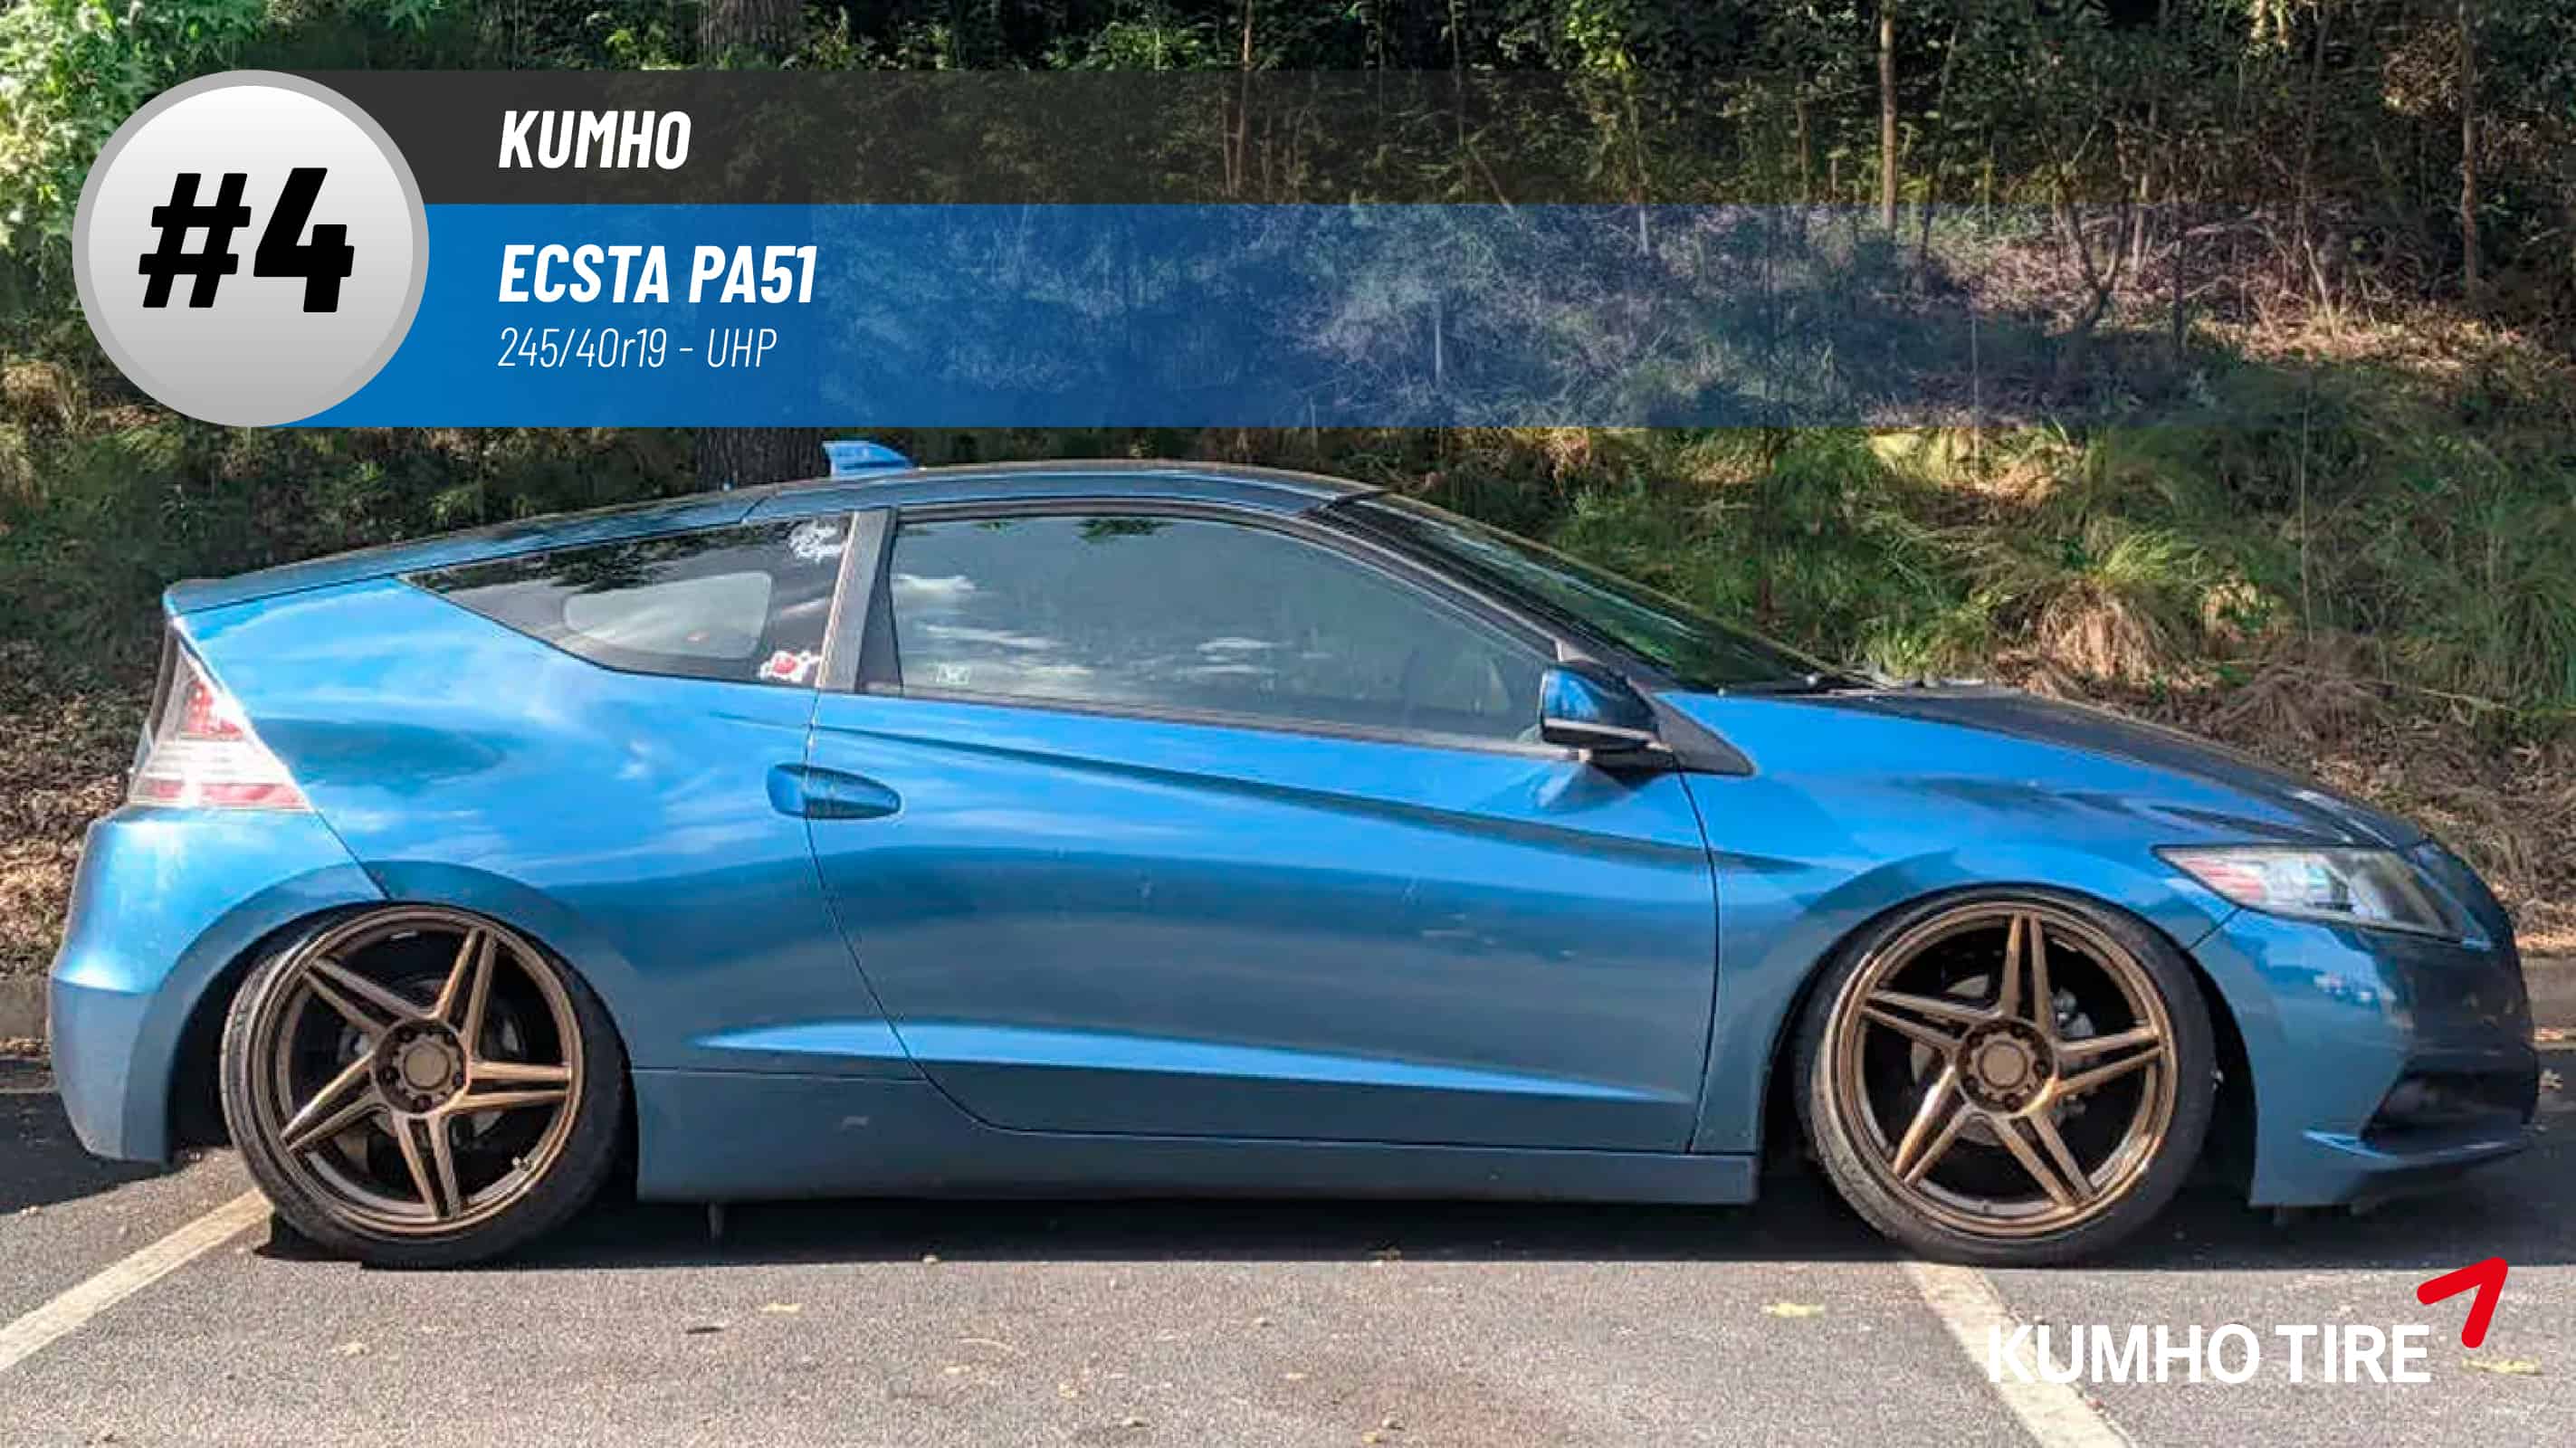 Top #4 UHP Tires: Kumho Ecsta PA51 – 245/40R19